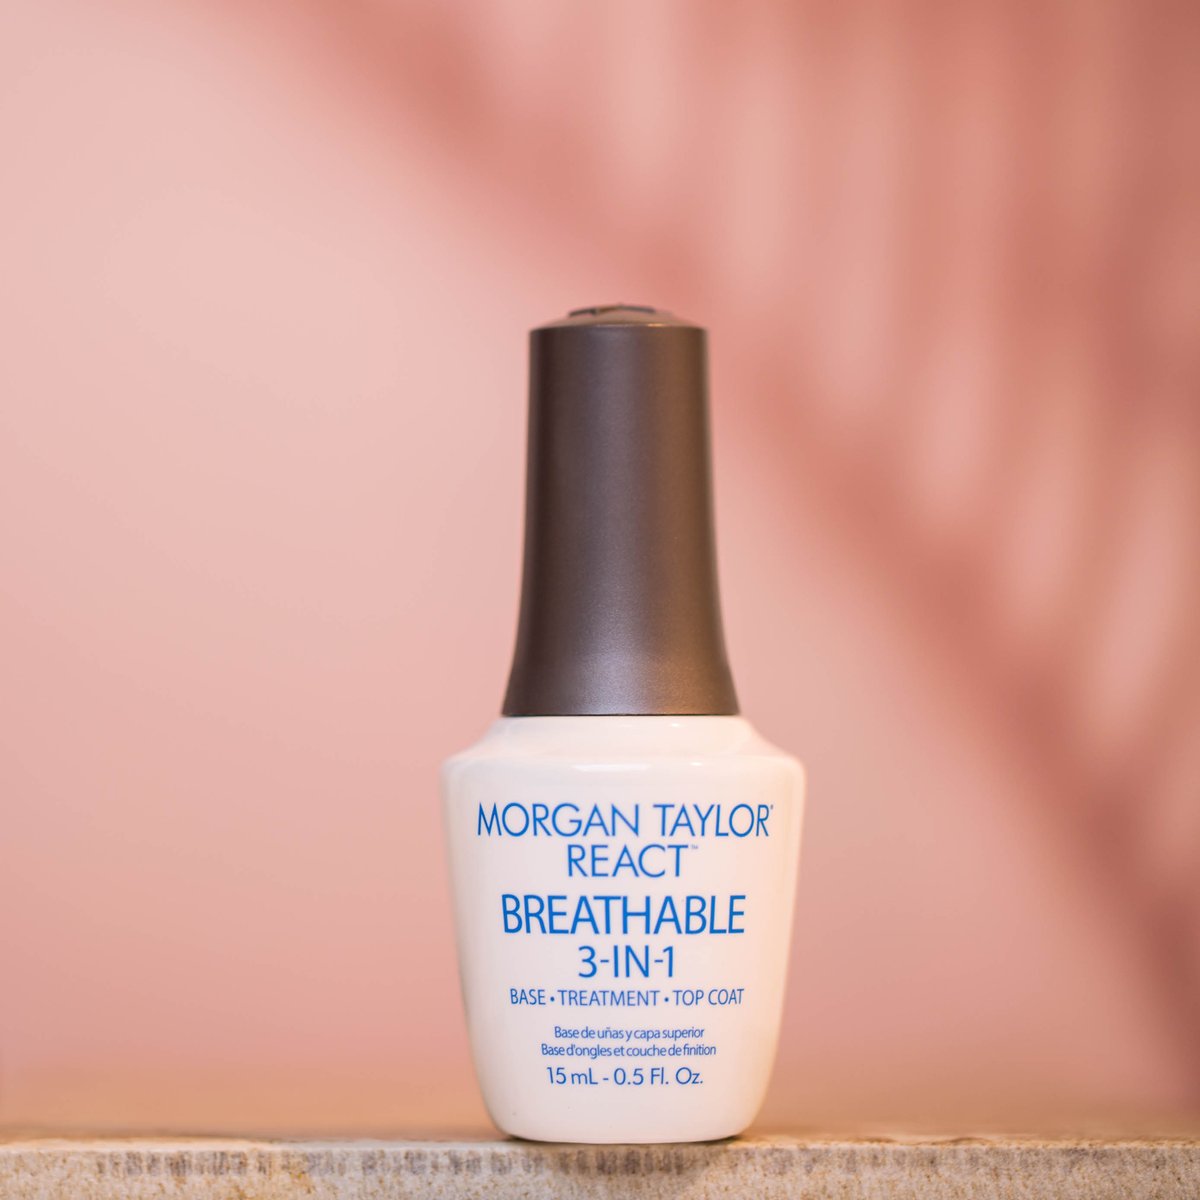 Looking for an all-in-one base and top coat while giving your nails the treatment and care they need? Morgan Taylor REACT Breathable 3-in-1 is for YOU, perfect with any lacquer system! #MorganTaylor #BreathableNails #basecoat #topcoat #nailcare #nailtreatment #nailsoftheday